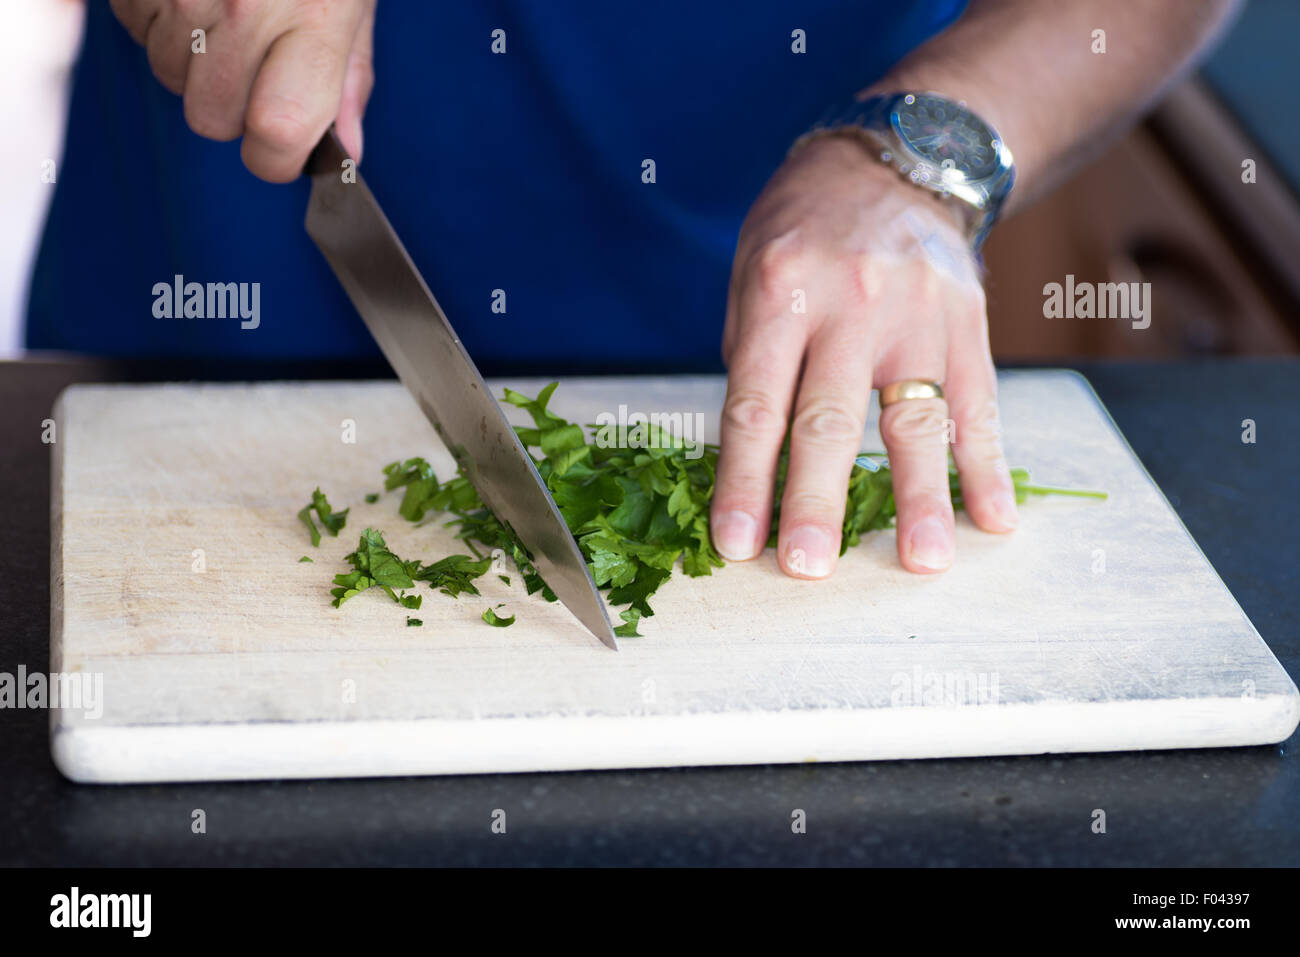 A Man chopping fresh flat leaf parsley for a meal on a chopping board with a  large kitchen knife Stock Photo